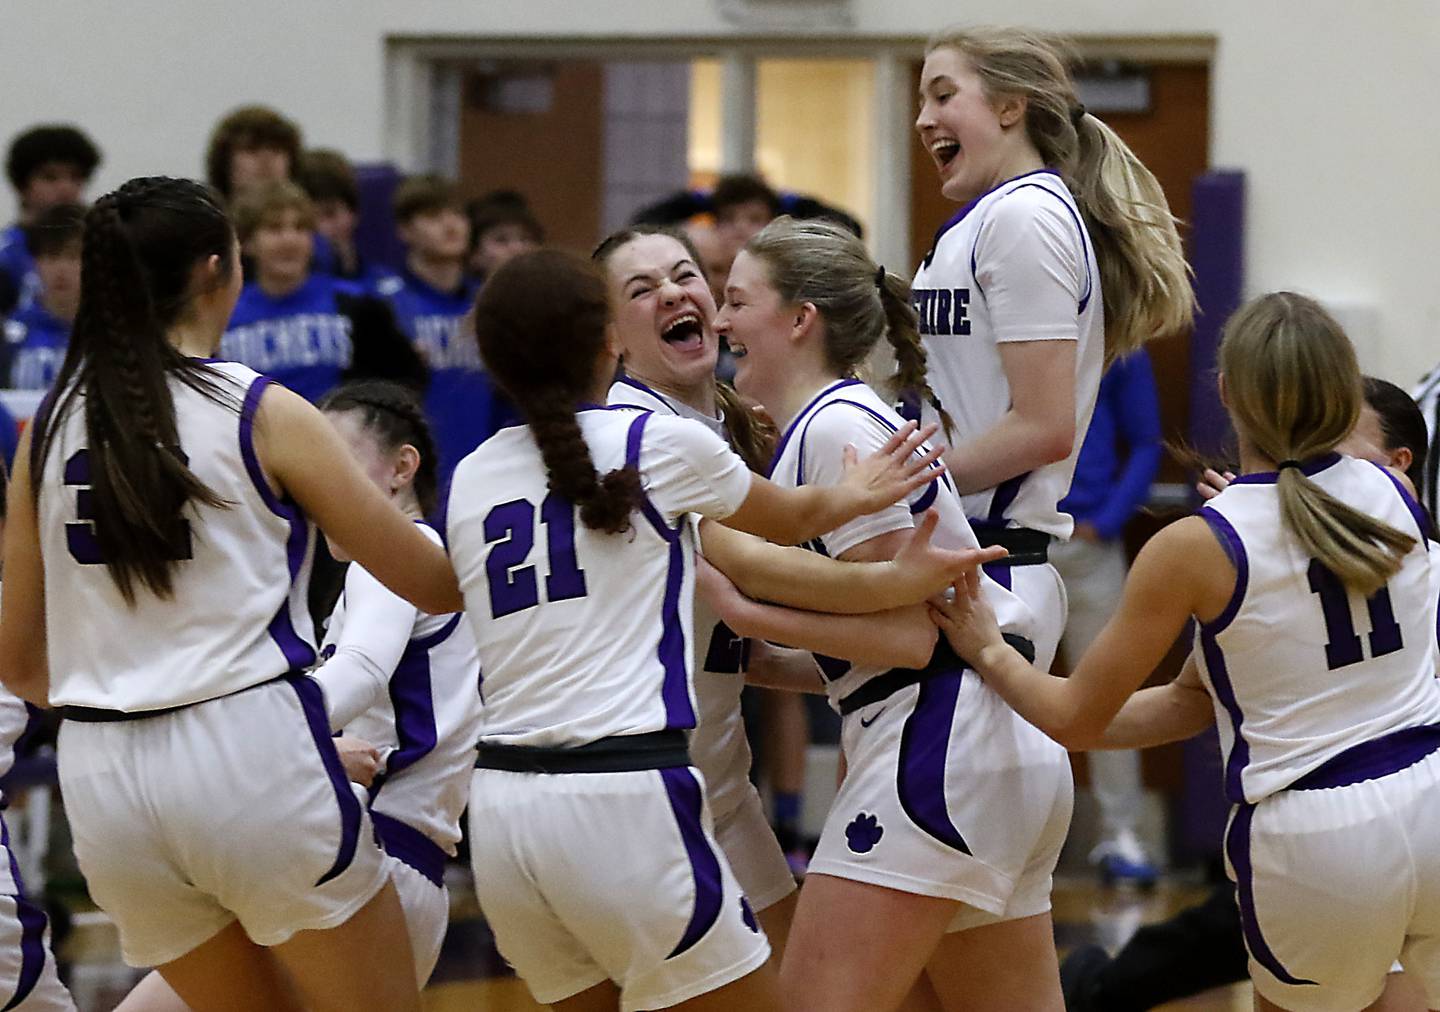 Hampshire players celebrate their 1 point victory over Burlington Central in a Fox Valley Conference girls basketball game Friday, Jan. 20, 2023, at Hampshire High School.